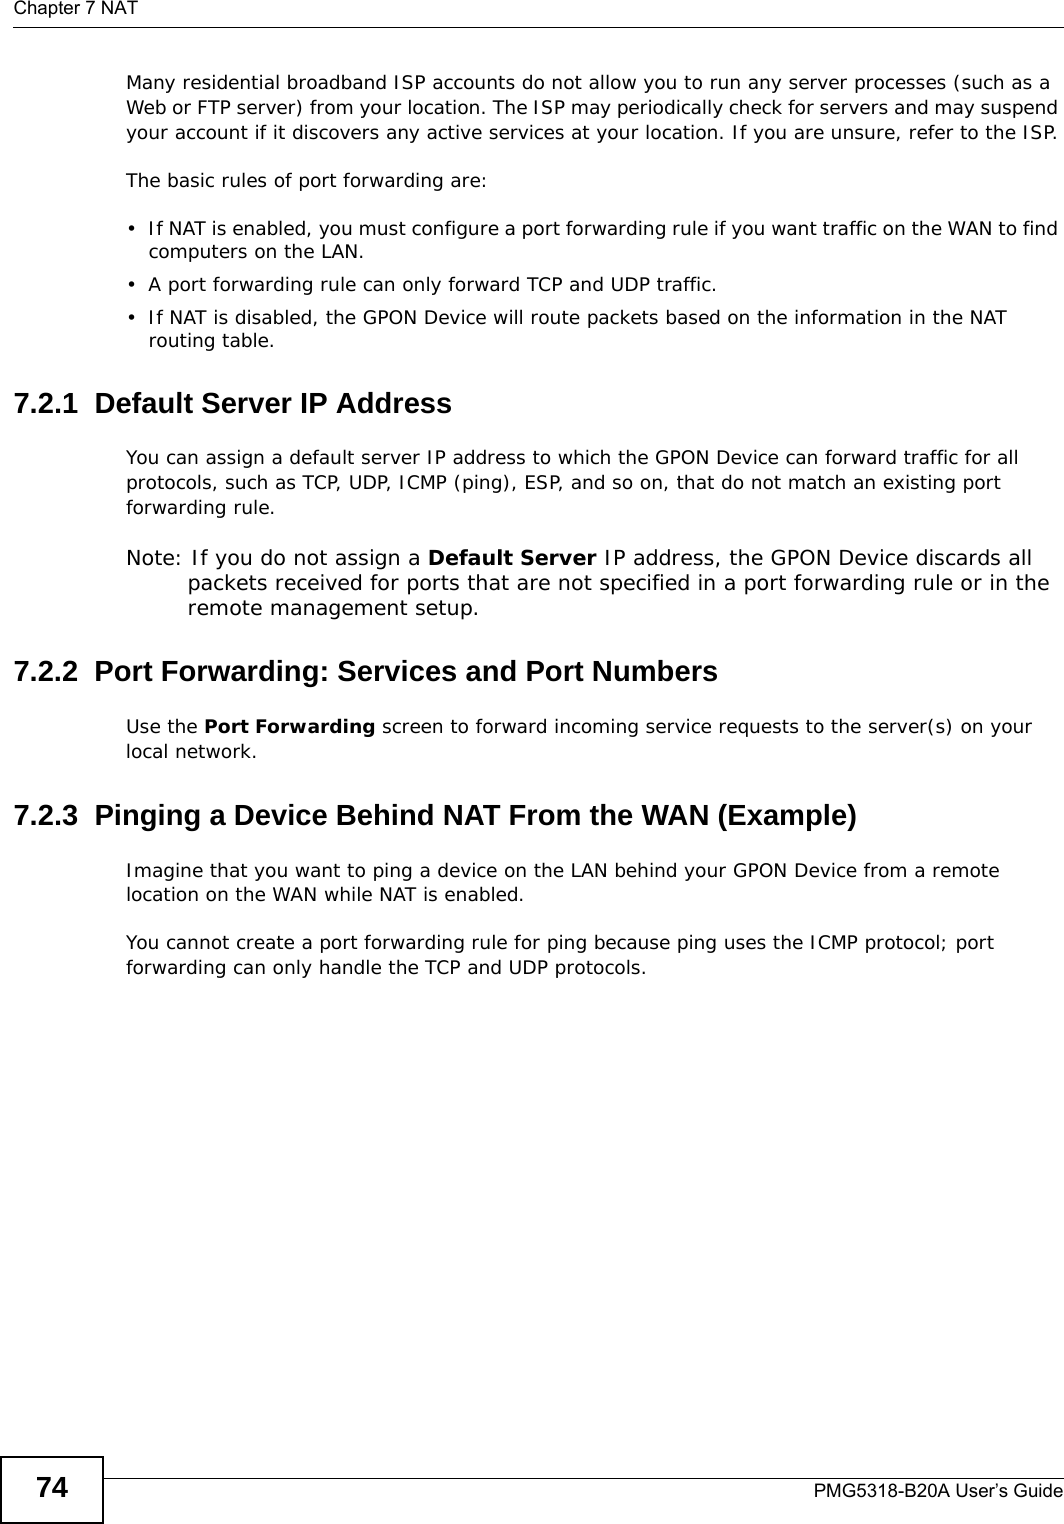 Chapter 7 NATPMG5318-B20A User’s Guide74Many residential broadband ISP accounts do not allow you to run any server processes (such as a Web or FTP server) from your location. The ISP may periodically check for servers and may suspend your account if it discovers any active services at your location. If you are unsure, refer to the ISP.The basic rules of port forwarding are:• If NAT is enabled, you must configure a port forwarding rule if you want traffic on the WAN to find computers on the LAN.• A port forwarding rule can only forward TCP and UDP traffic.• If NAT is disabled, the GPON Device will route packets based on the information in the NAT routing table.7.2.1  Default Server IP AddressYou can assign a default server IP address to which the GPON Device can forward traffic for all protocols, such as TCP, UDP, ICMP (ping), ESP, and so on, that do not match an existing port forwarding rule.Note: If you do not assign a Default Server IP address, the GPON Device discards all packets received for ports that are not specified in a port forwarding rule or in the remote management setup.7.2.2  Port Forwarding: Services and Port NumbersUse the Port Forwarding screen to forward incoming service requests to the server(s) on your local network. 7.2.3  Pinging a Device Behind NAT From the WAN (Example)Imagine that you want to ping a device on the LAN behind your GPON Device from a remote location on the WAN while NAT is enabled. You cannot create a port forwarding rule for ping because ping uses the ICMP protocol; port forwarding can only handle the TCP and UDP protocols. 